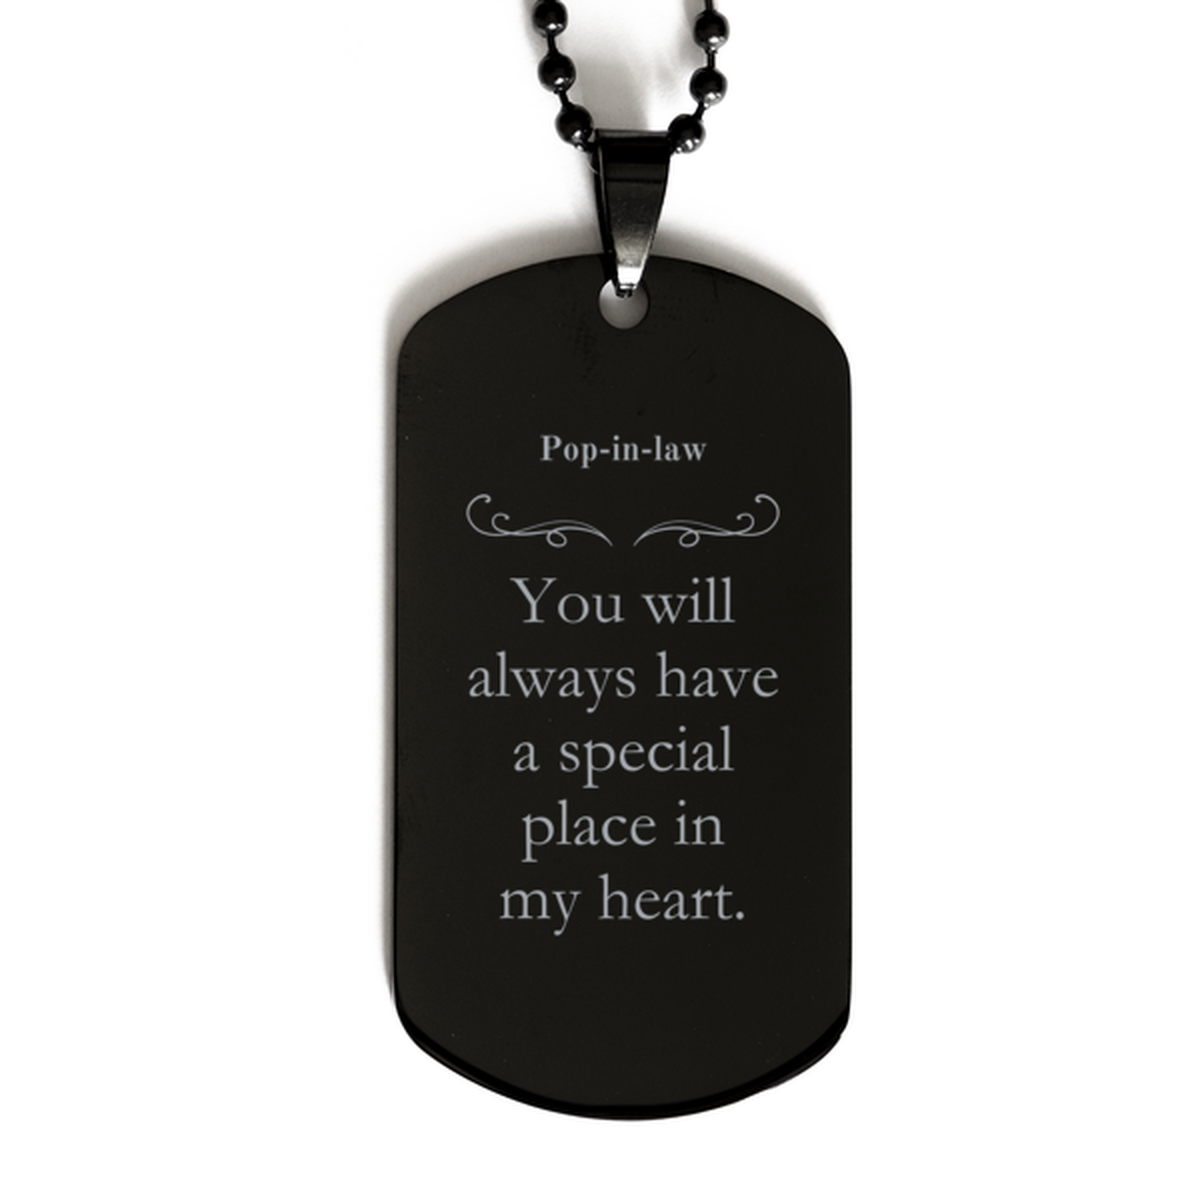 Engraved Black Dog Tag Pop-in-law Special Place Heart Gift for Birthday Graduation Veterans Day - Meaningful and Unique Way to Show Love and Appreciation